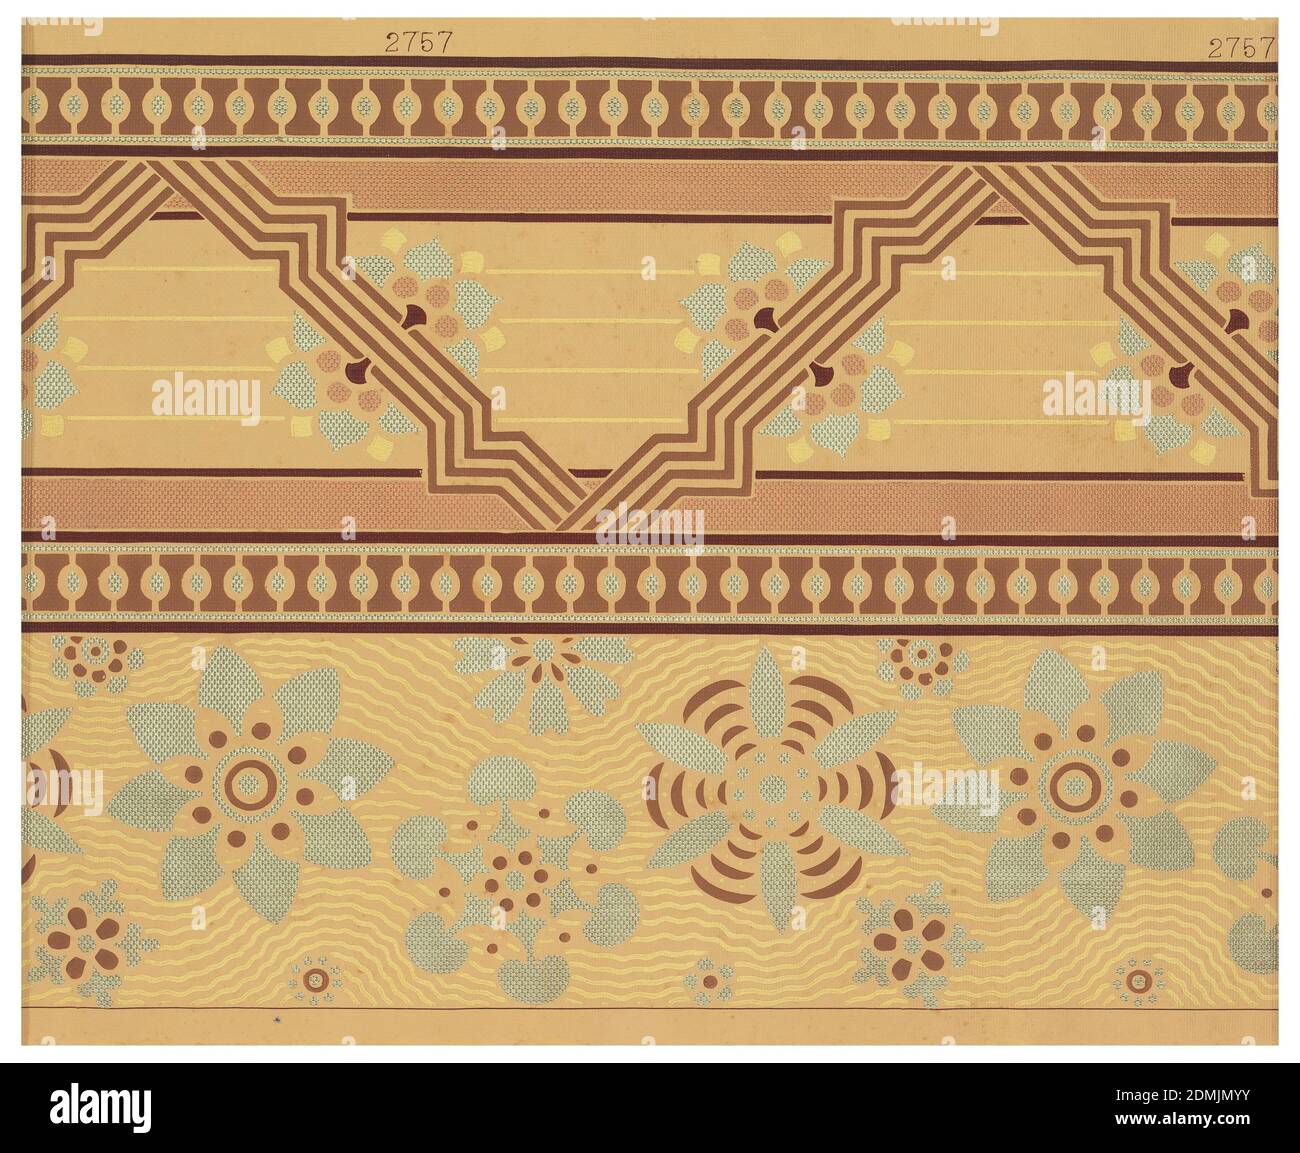 Ceiling border, Machine-printed paper, Wallpaper roll. Borders or sidewall: two different designs each occupying half the paper width. Stylized blue flowers on wavy background; and zig-zag motif with blue flowers. Printed in blue and metallic copper., USA, 1875–1900, Wallcoverings, Ceiling border Stock Photo